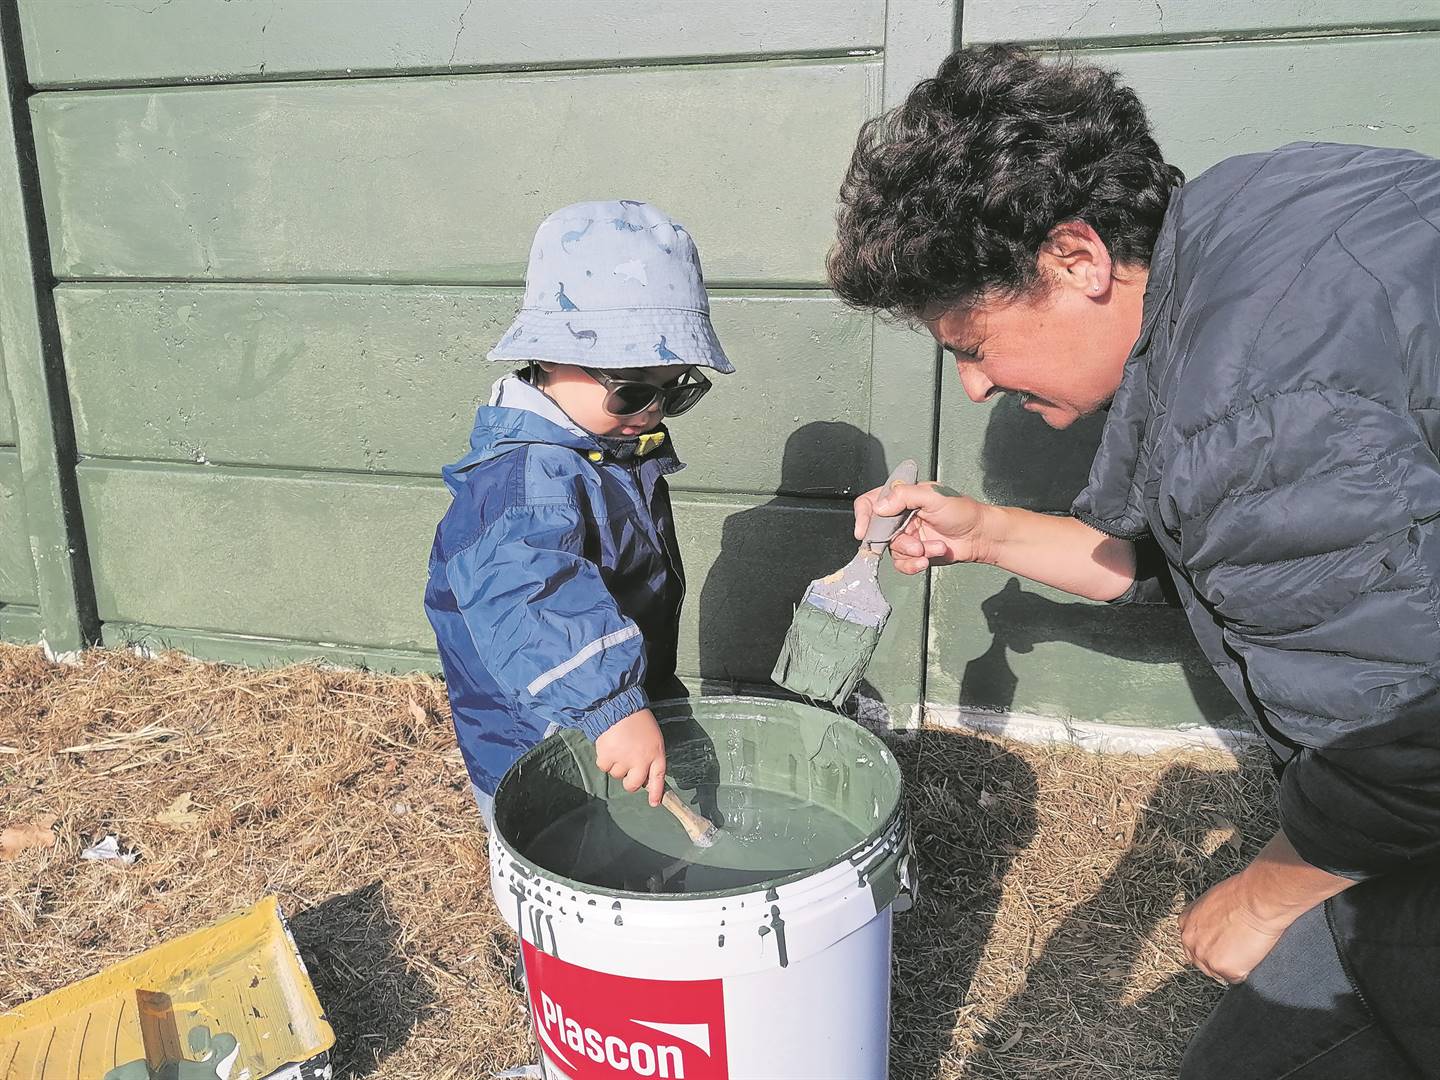 In restoring dignity to the Batavia Special Needs School, many other residents offered a hand to help with painting, including the 20-month-old Lio Schablitzky here with Taheera Shaboodien, as well as a 12-year-old girl.PHOTOS: Supplied